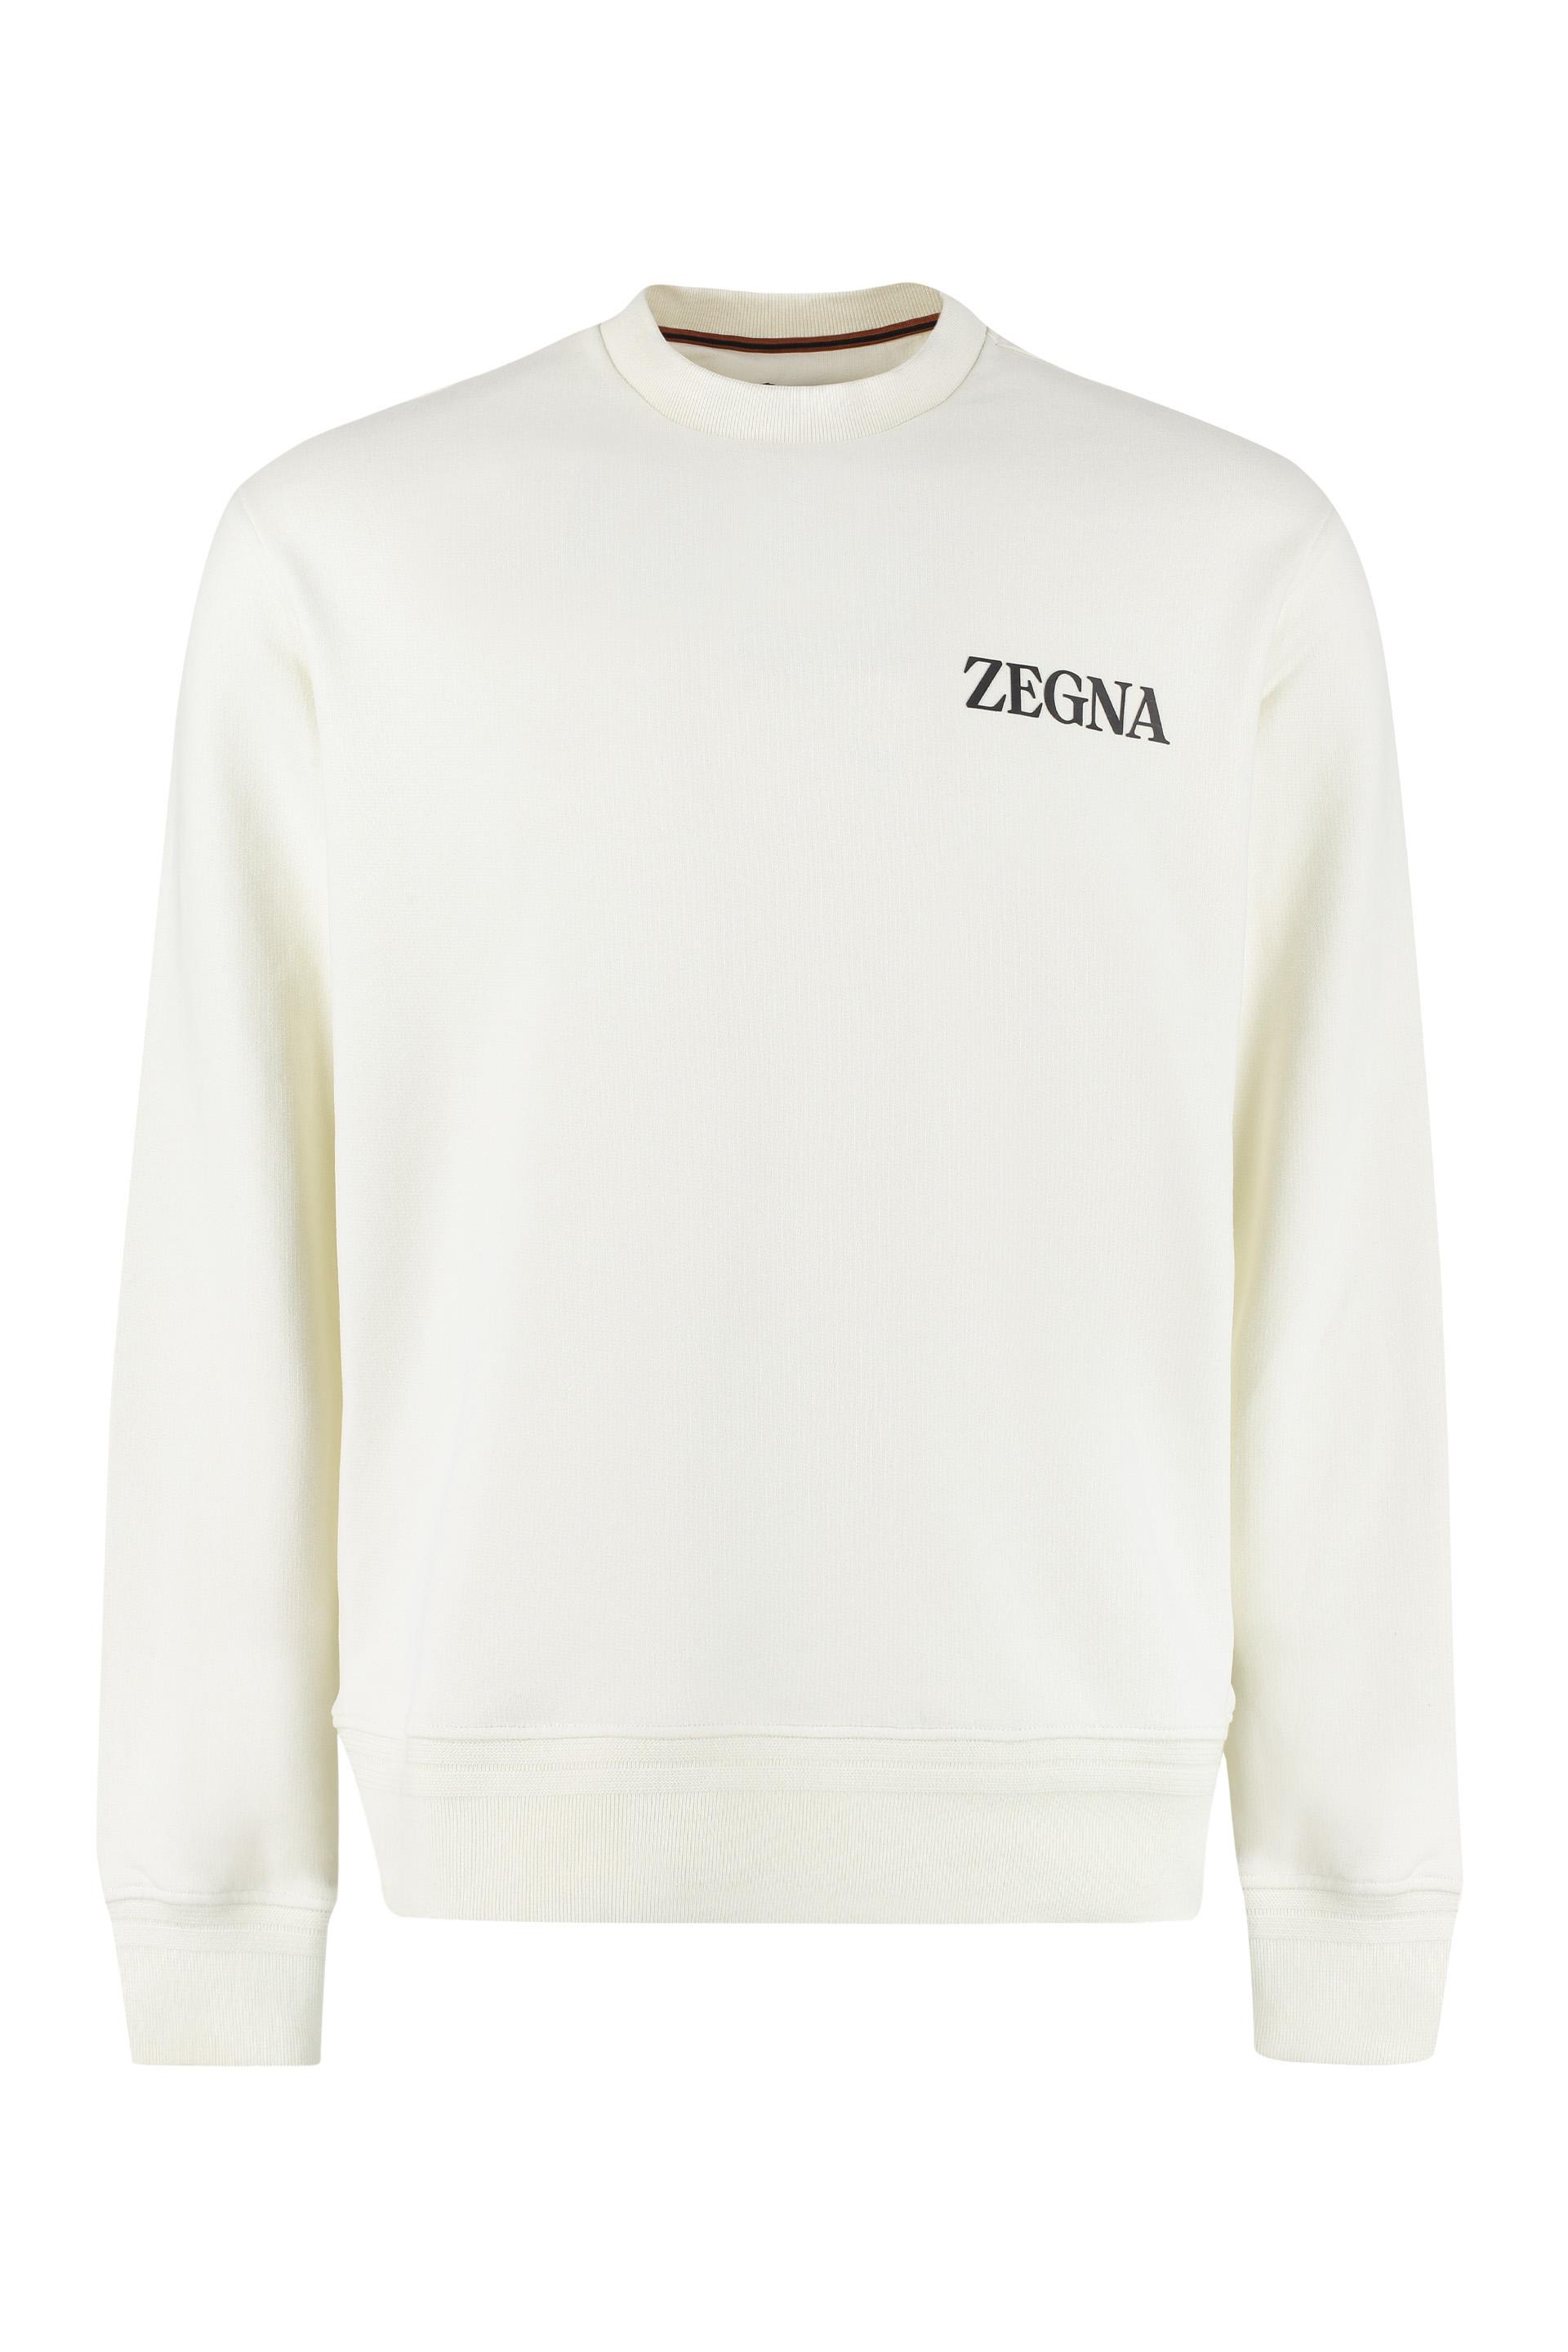 Z Zegna Cotton Sweatshirt With Logo in Green for Men Mens Clothing Activewear gym and workout clothes Sweatshirts 